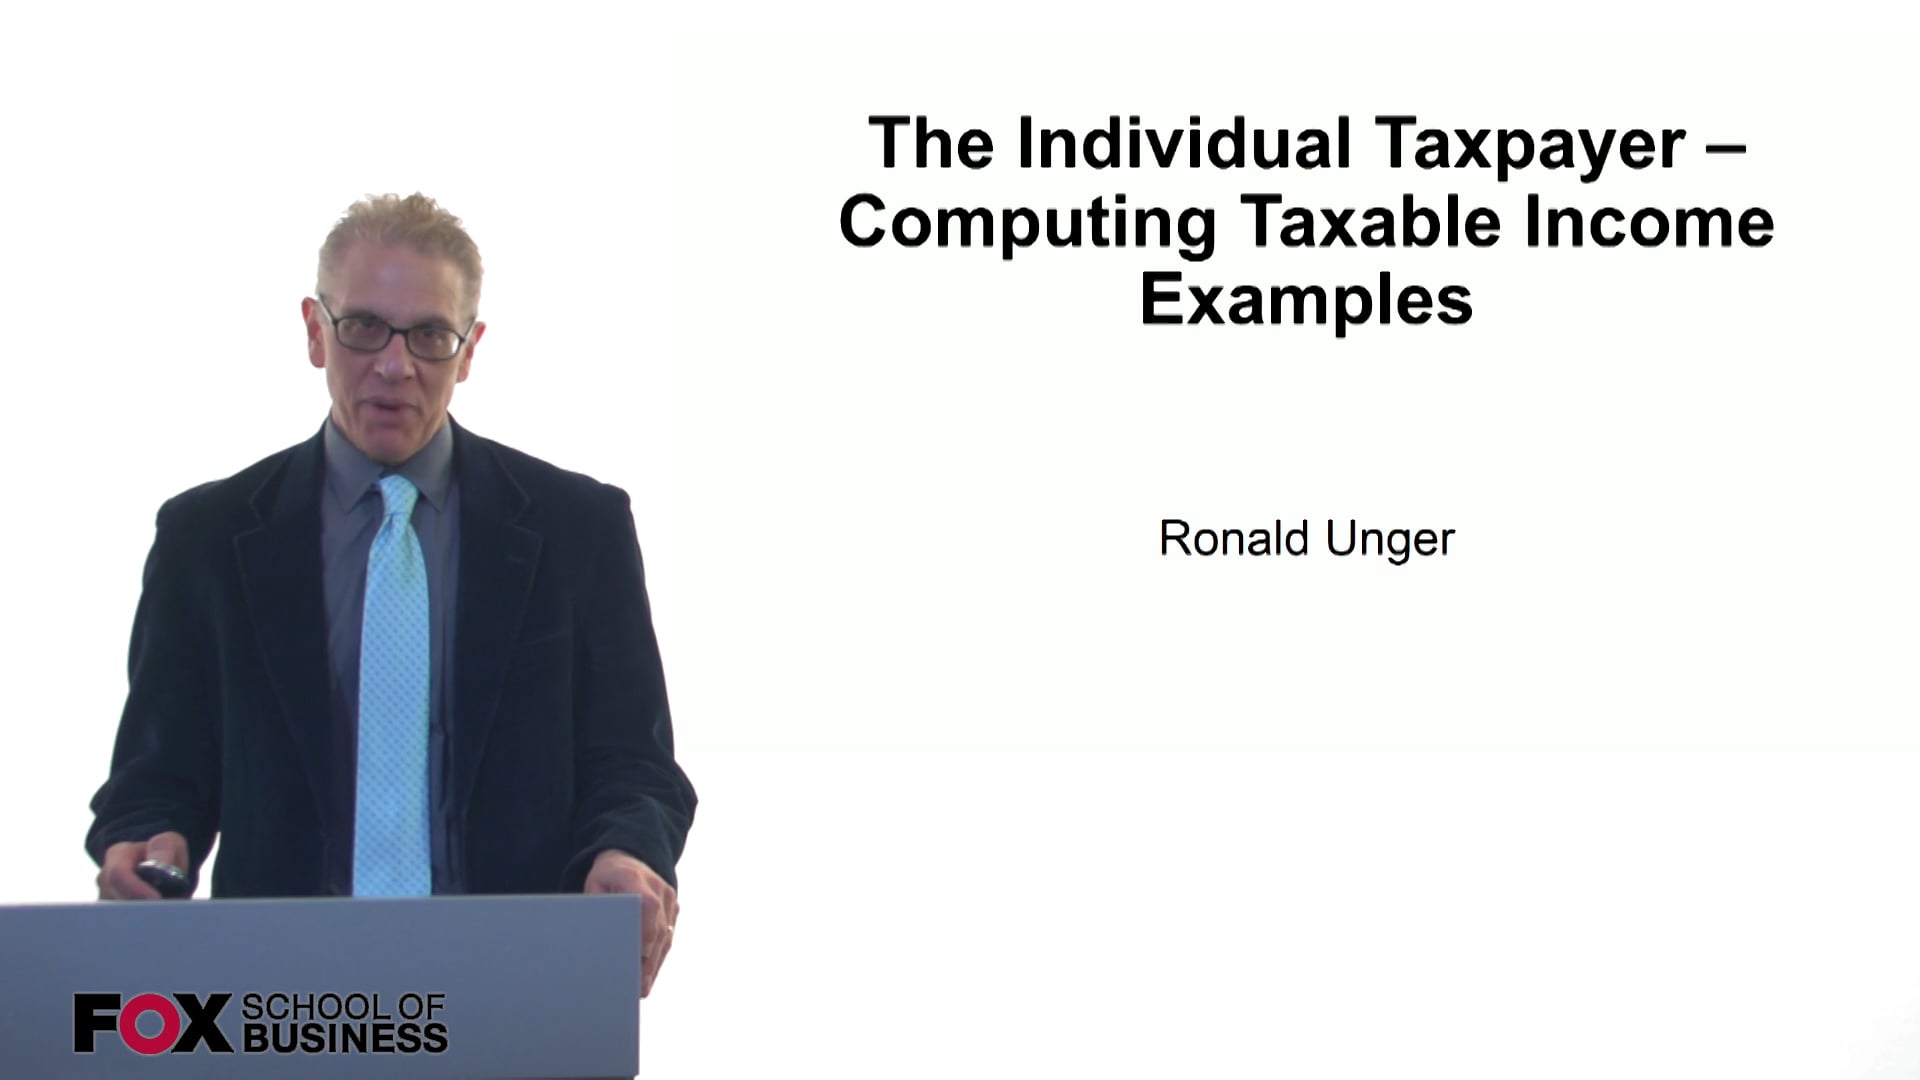 The Individual Taxpayer – Computing Taxable Income Example